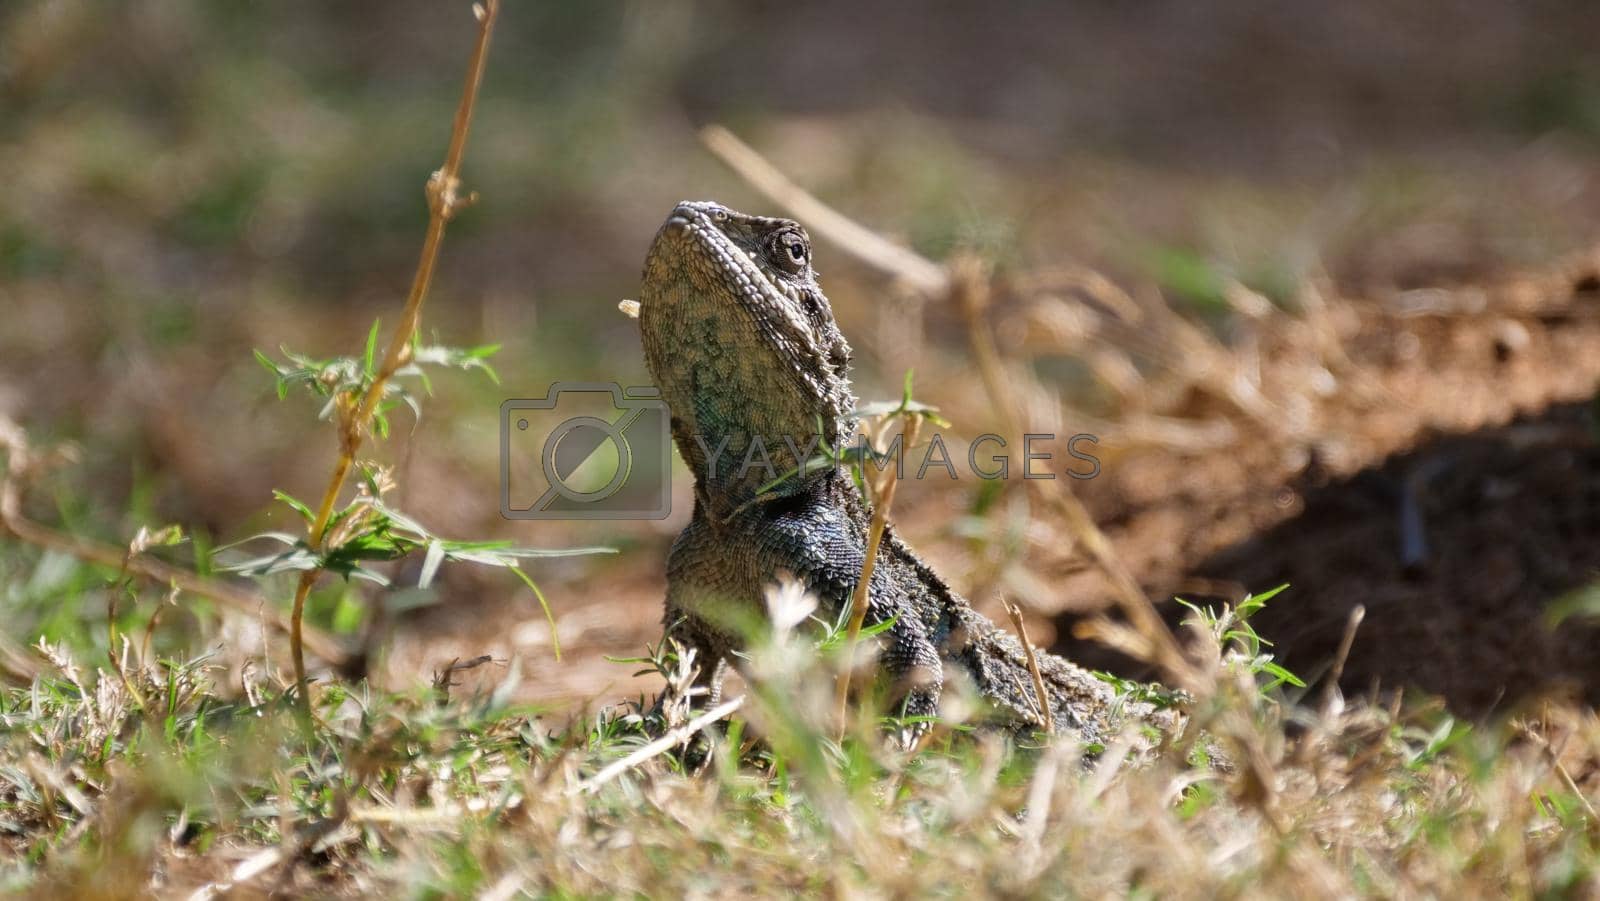 Royalty free image of Southern tree agama in the grass  by traveltelly